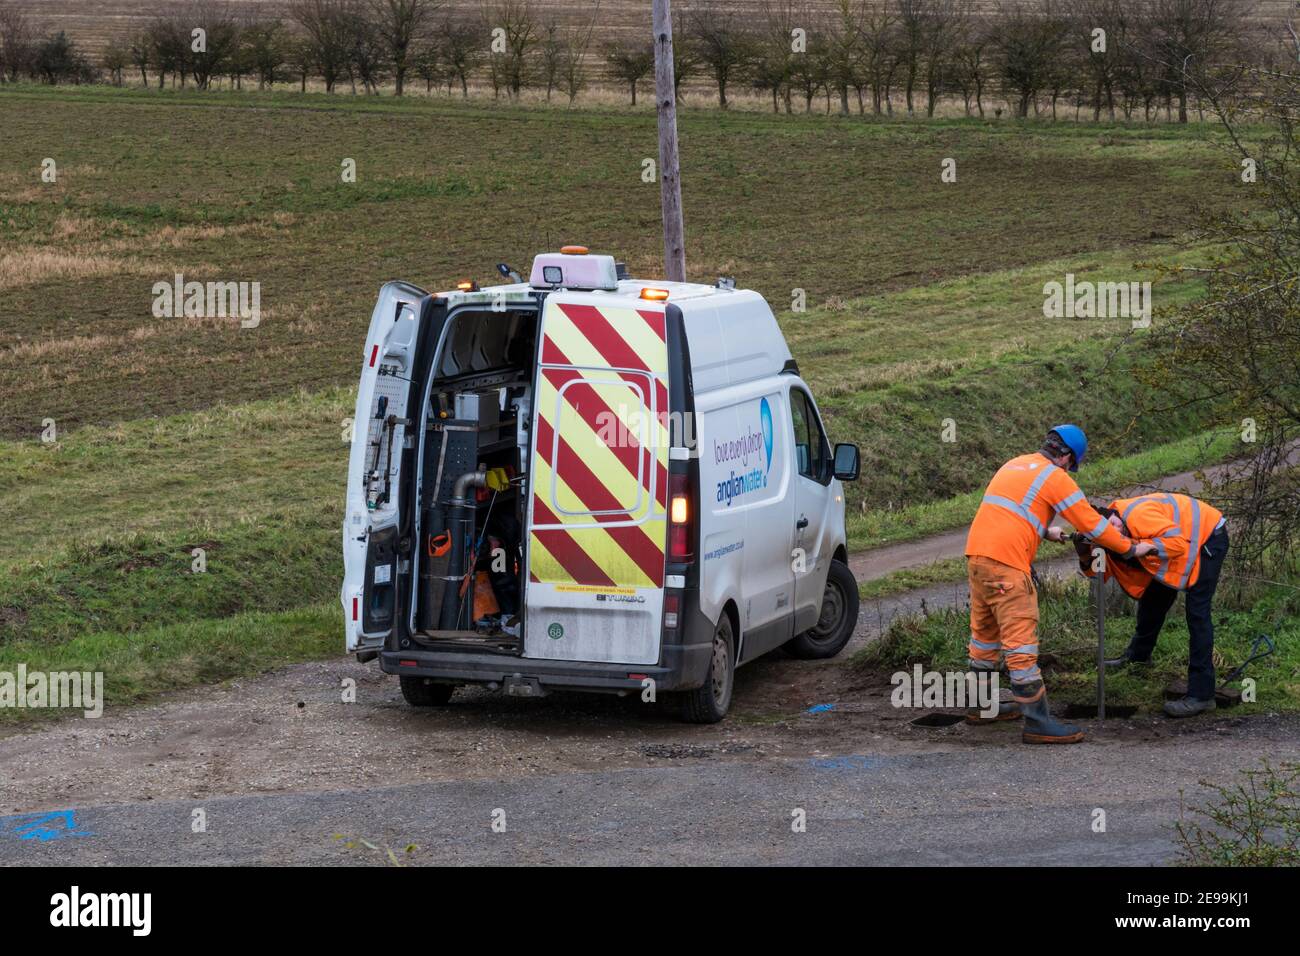 Engineers from Anglian Water investigate a water main in a rural Norfolk location. Stock Photo